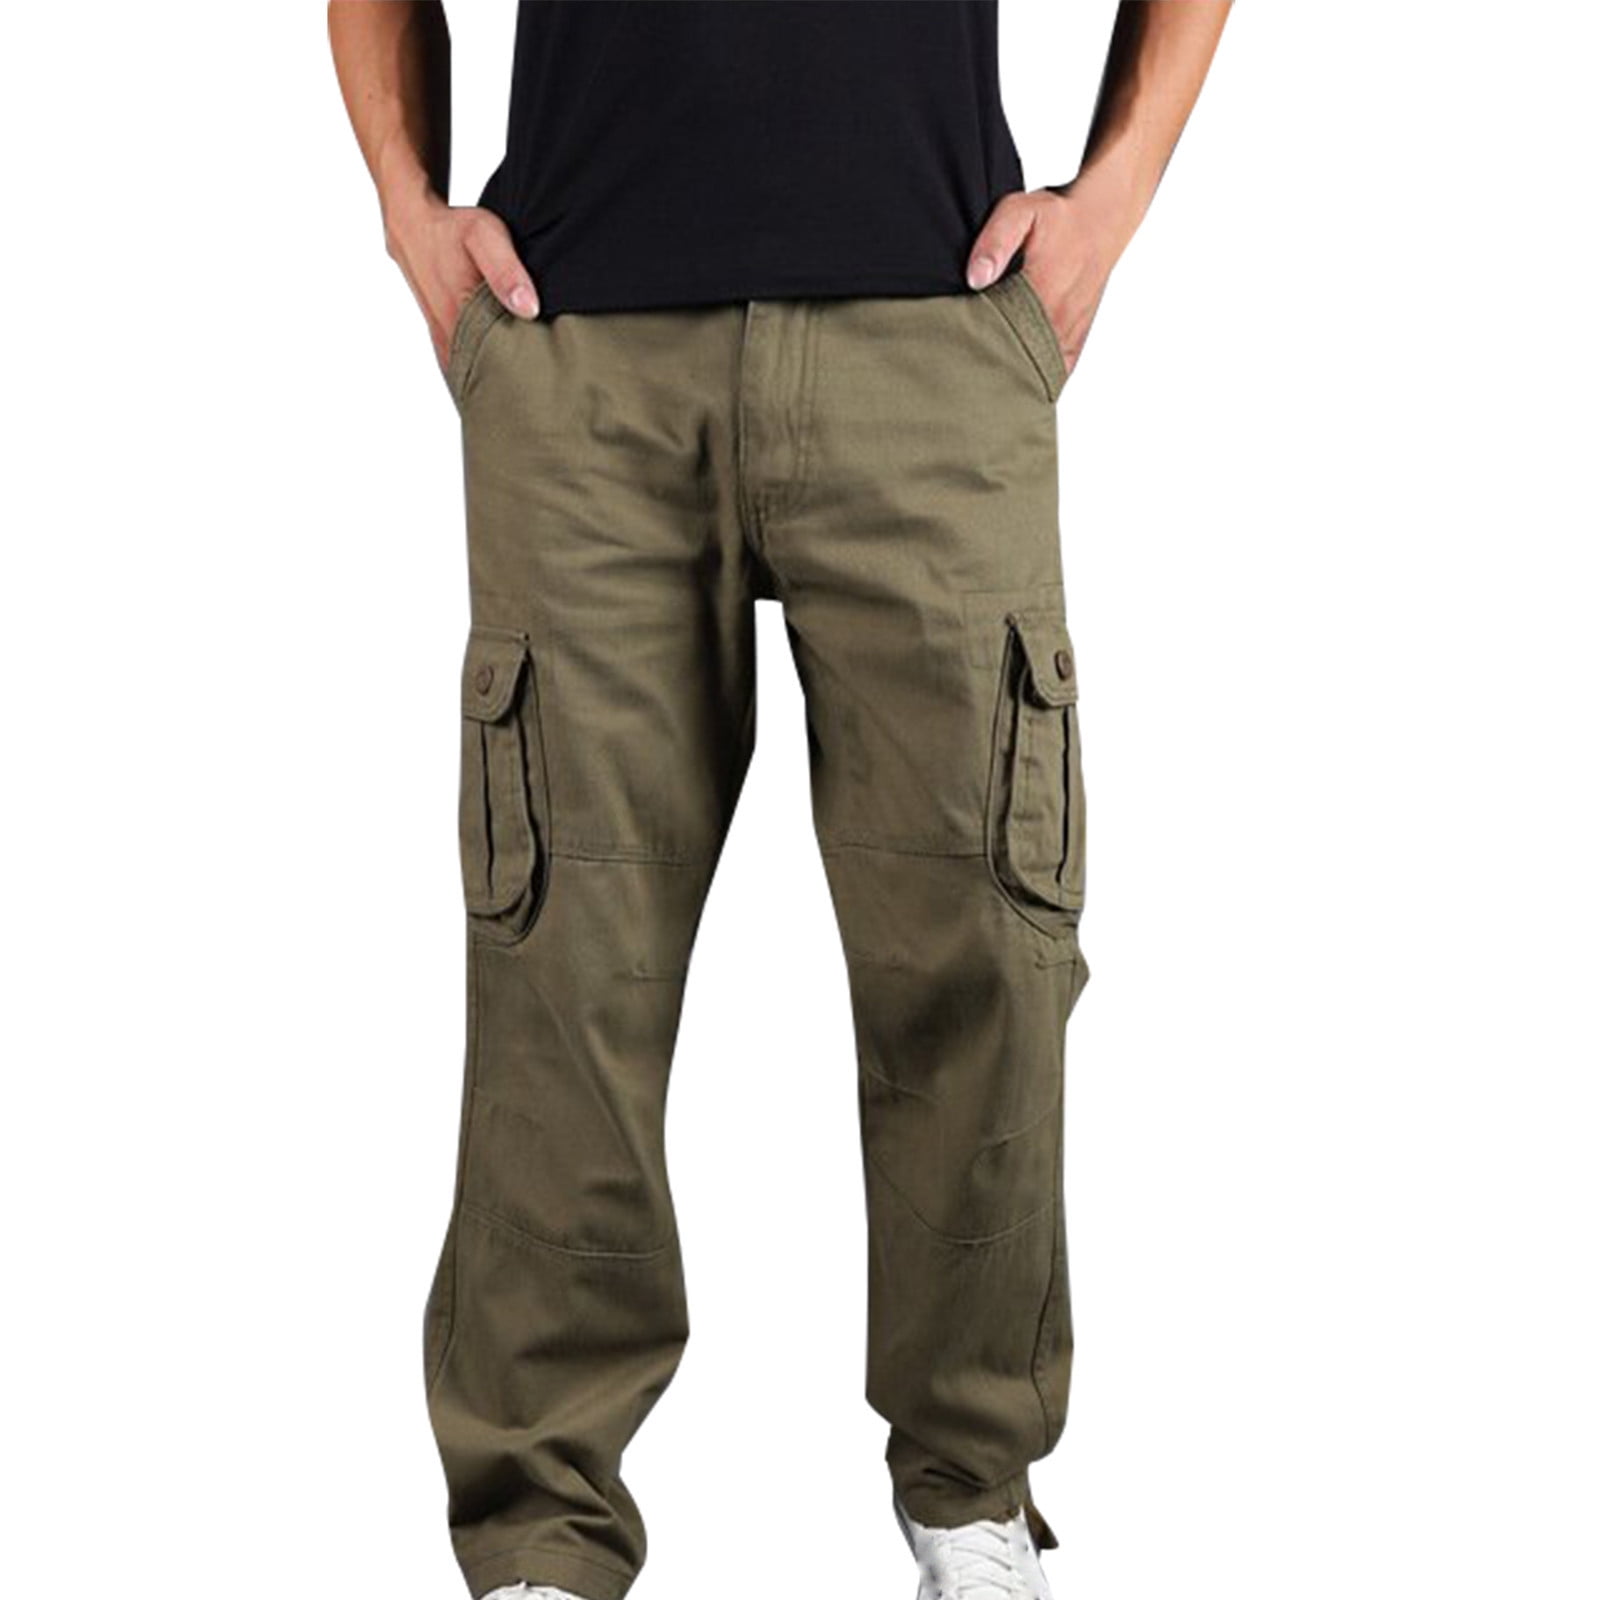  Womens Cargo Pants with Pockets Casual Military Army